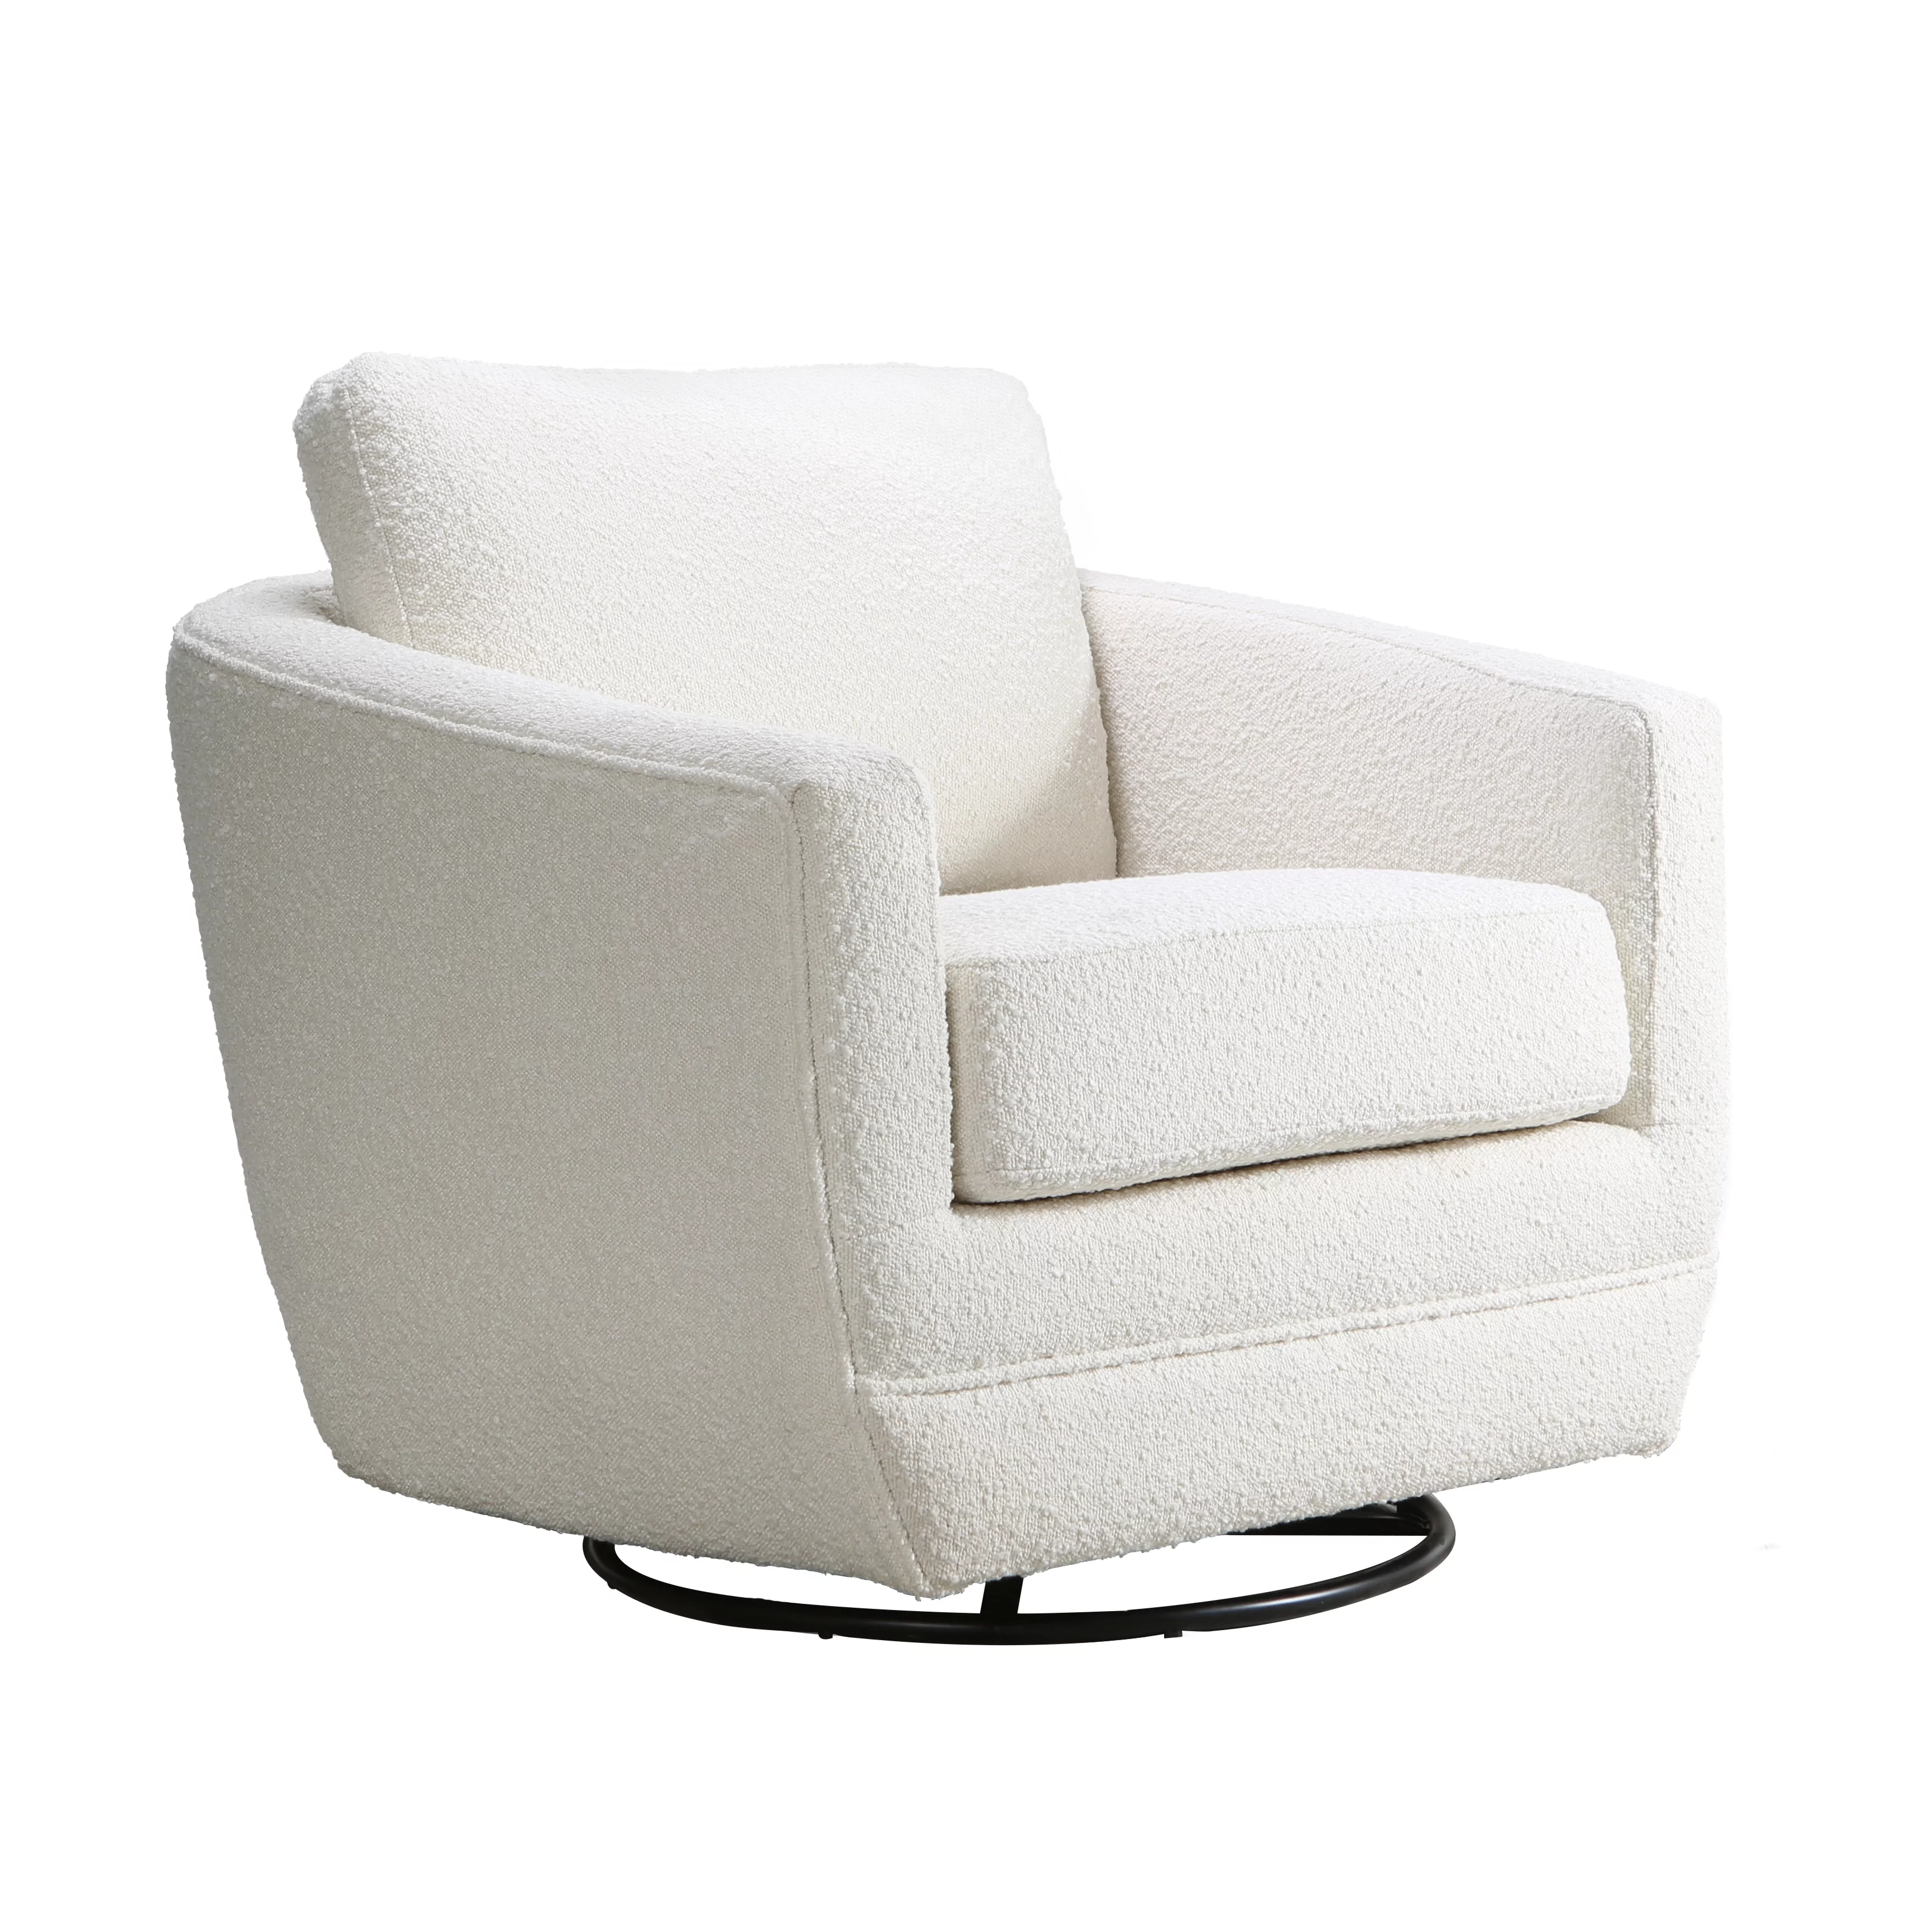 Second Story Home Gogh Upholstered Swivel Glider- Boucle